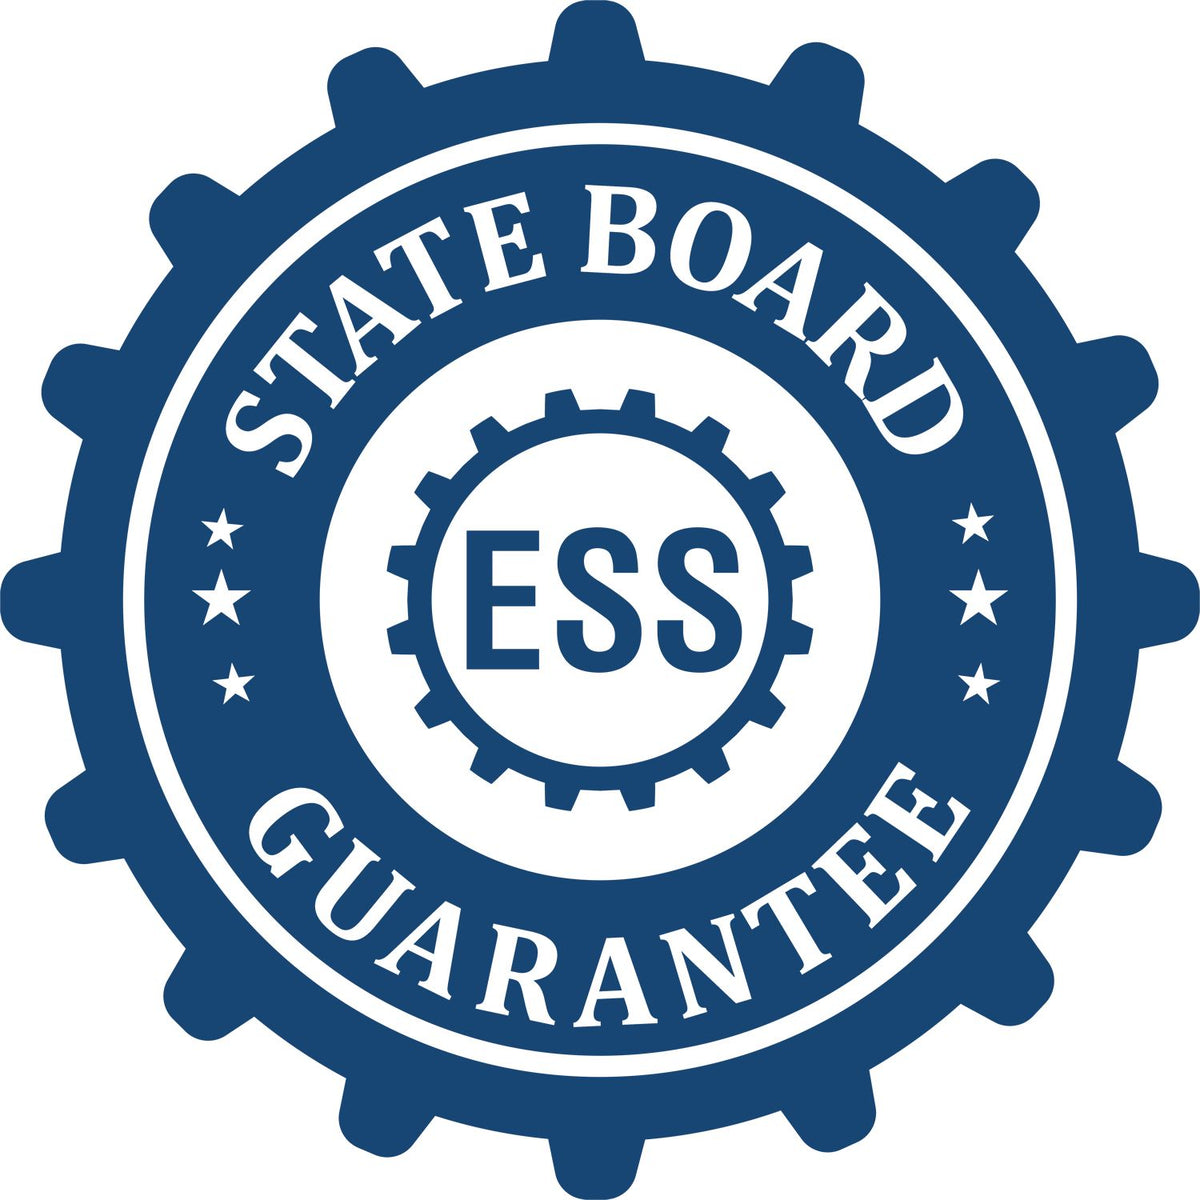 An emblem in a gear shape illustrating a state board guarantee for the Wooden Handle Ohio State Seal Notary Public Stamp product.